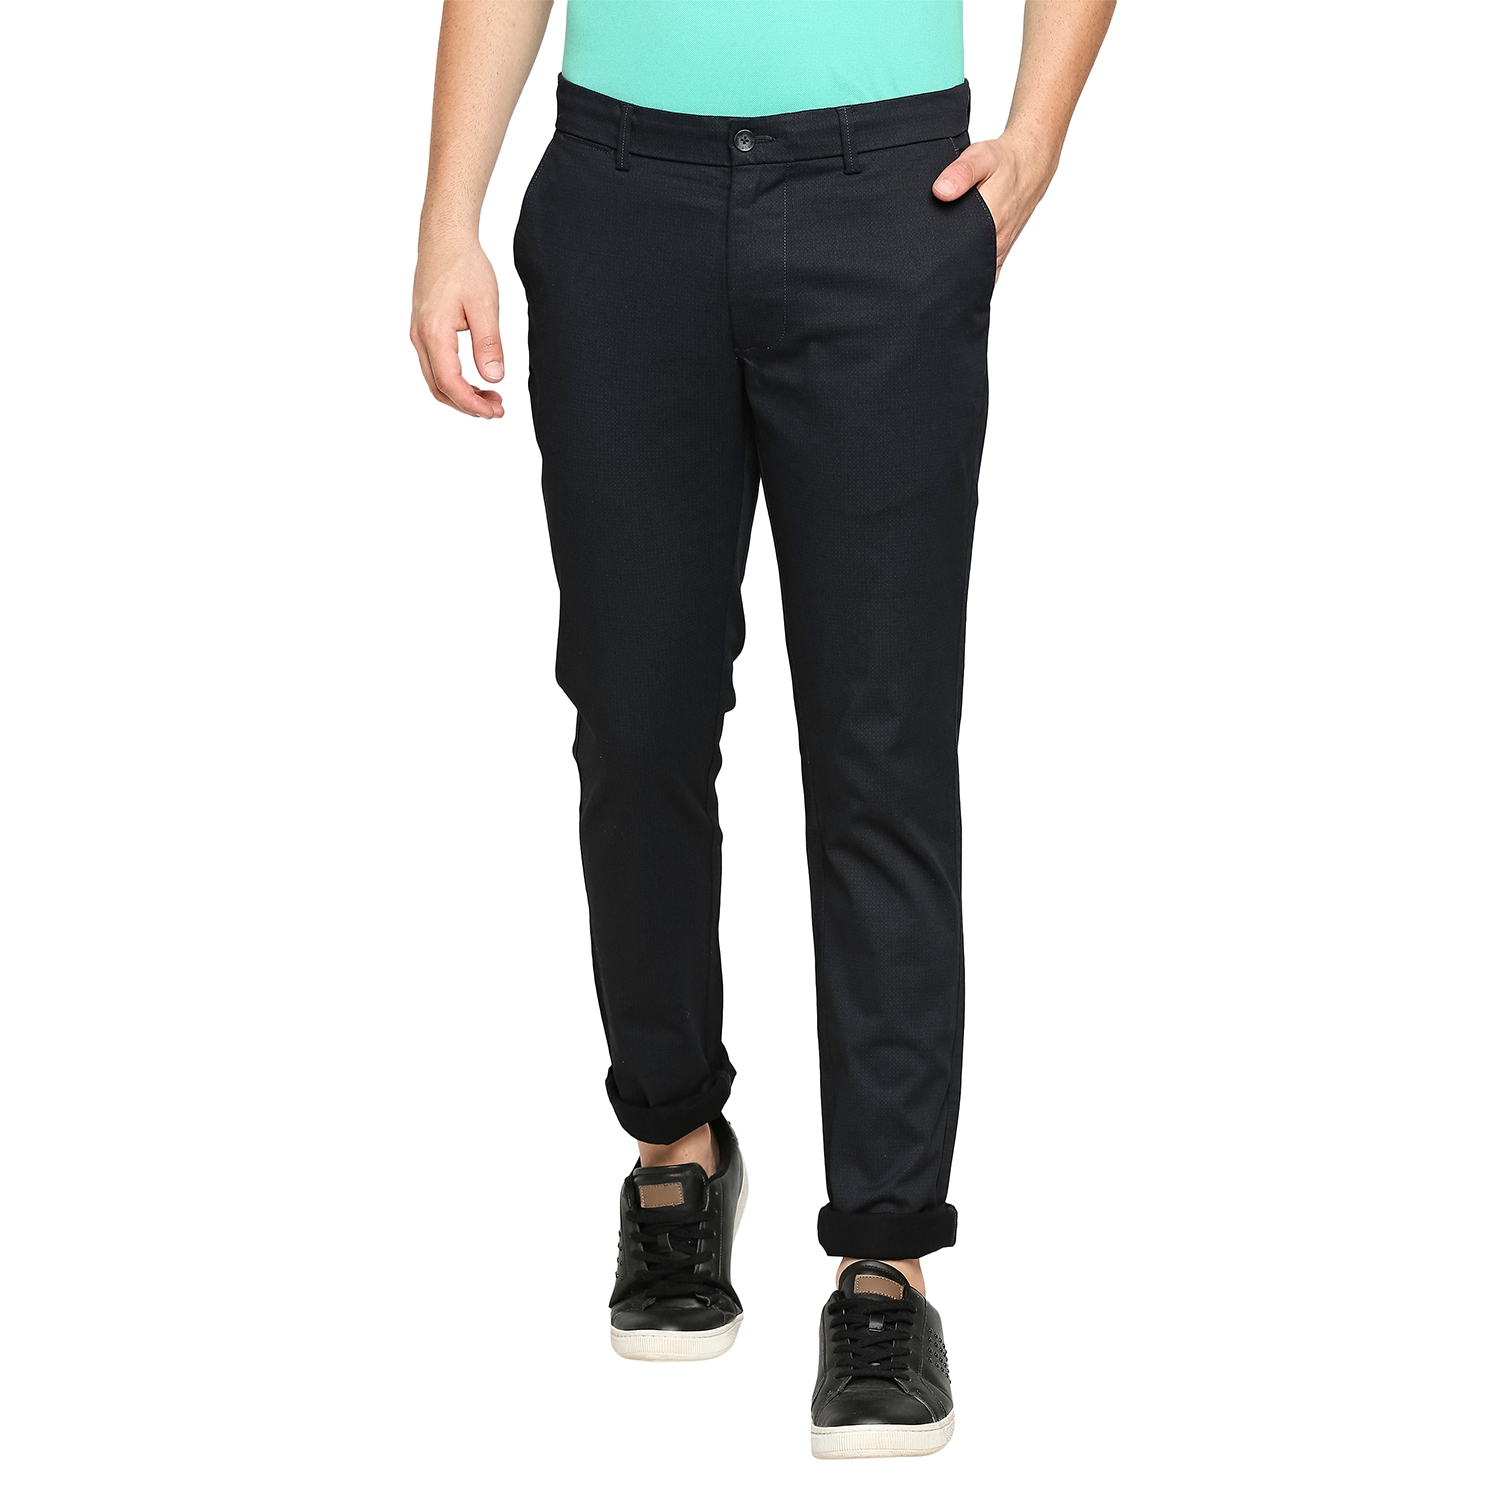 Basics | BASICS CASUAL PRINTED BLACK COTTON STRETCH TAPERED TROUSERS 